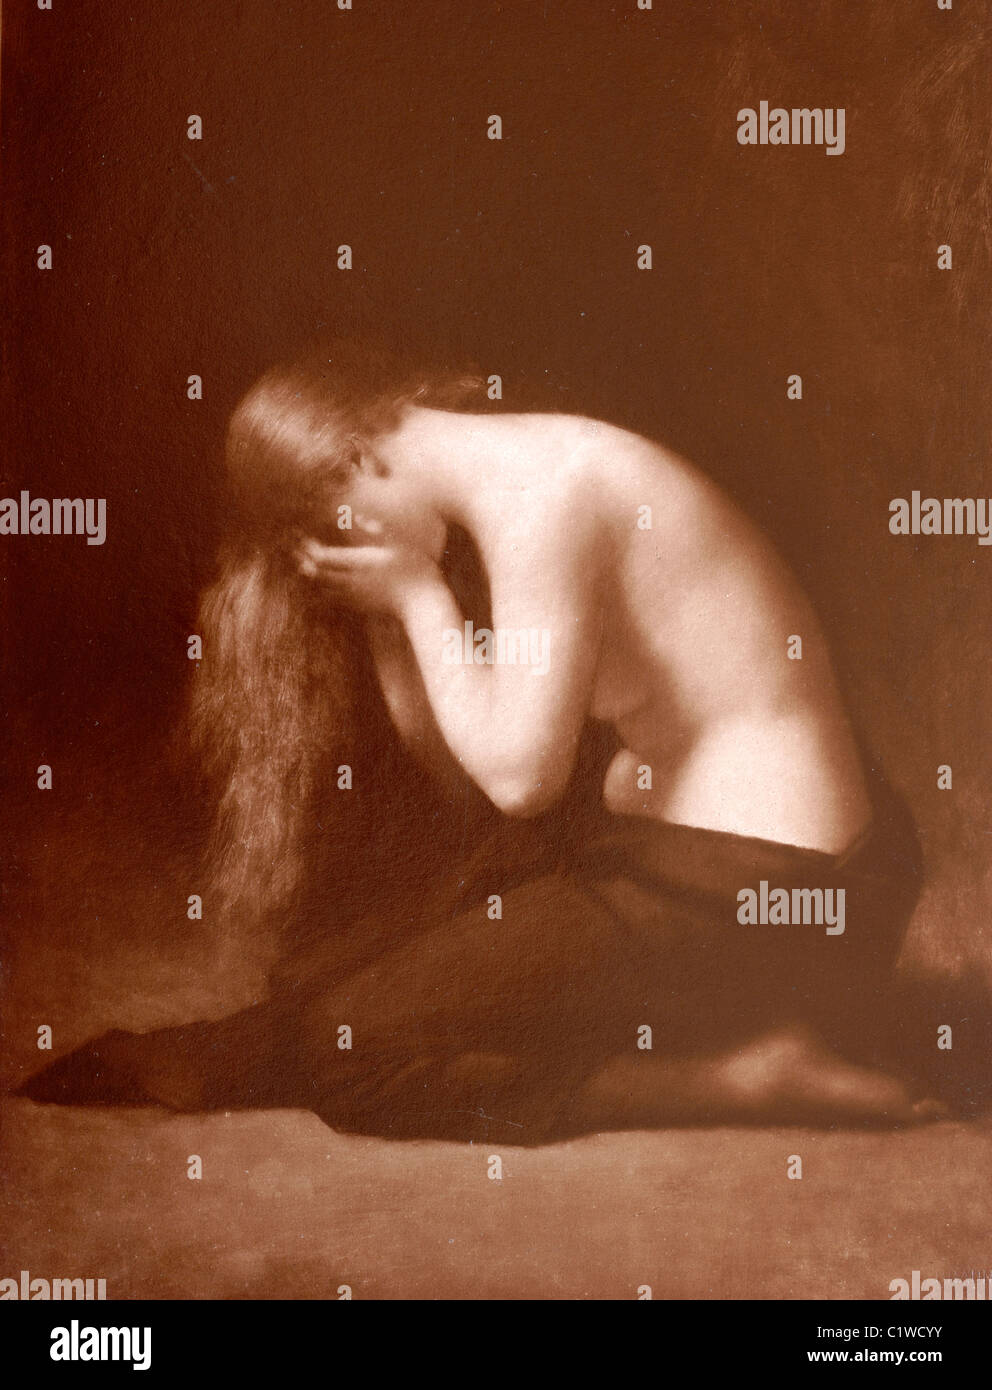 Weeping or Repentant Mary Magdalene (1878) by Jean-Jacques Henner. Woodburytype by Braun. Stock Photo